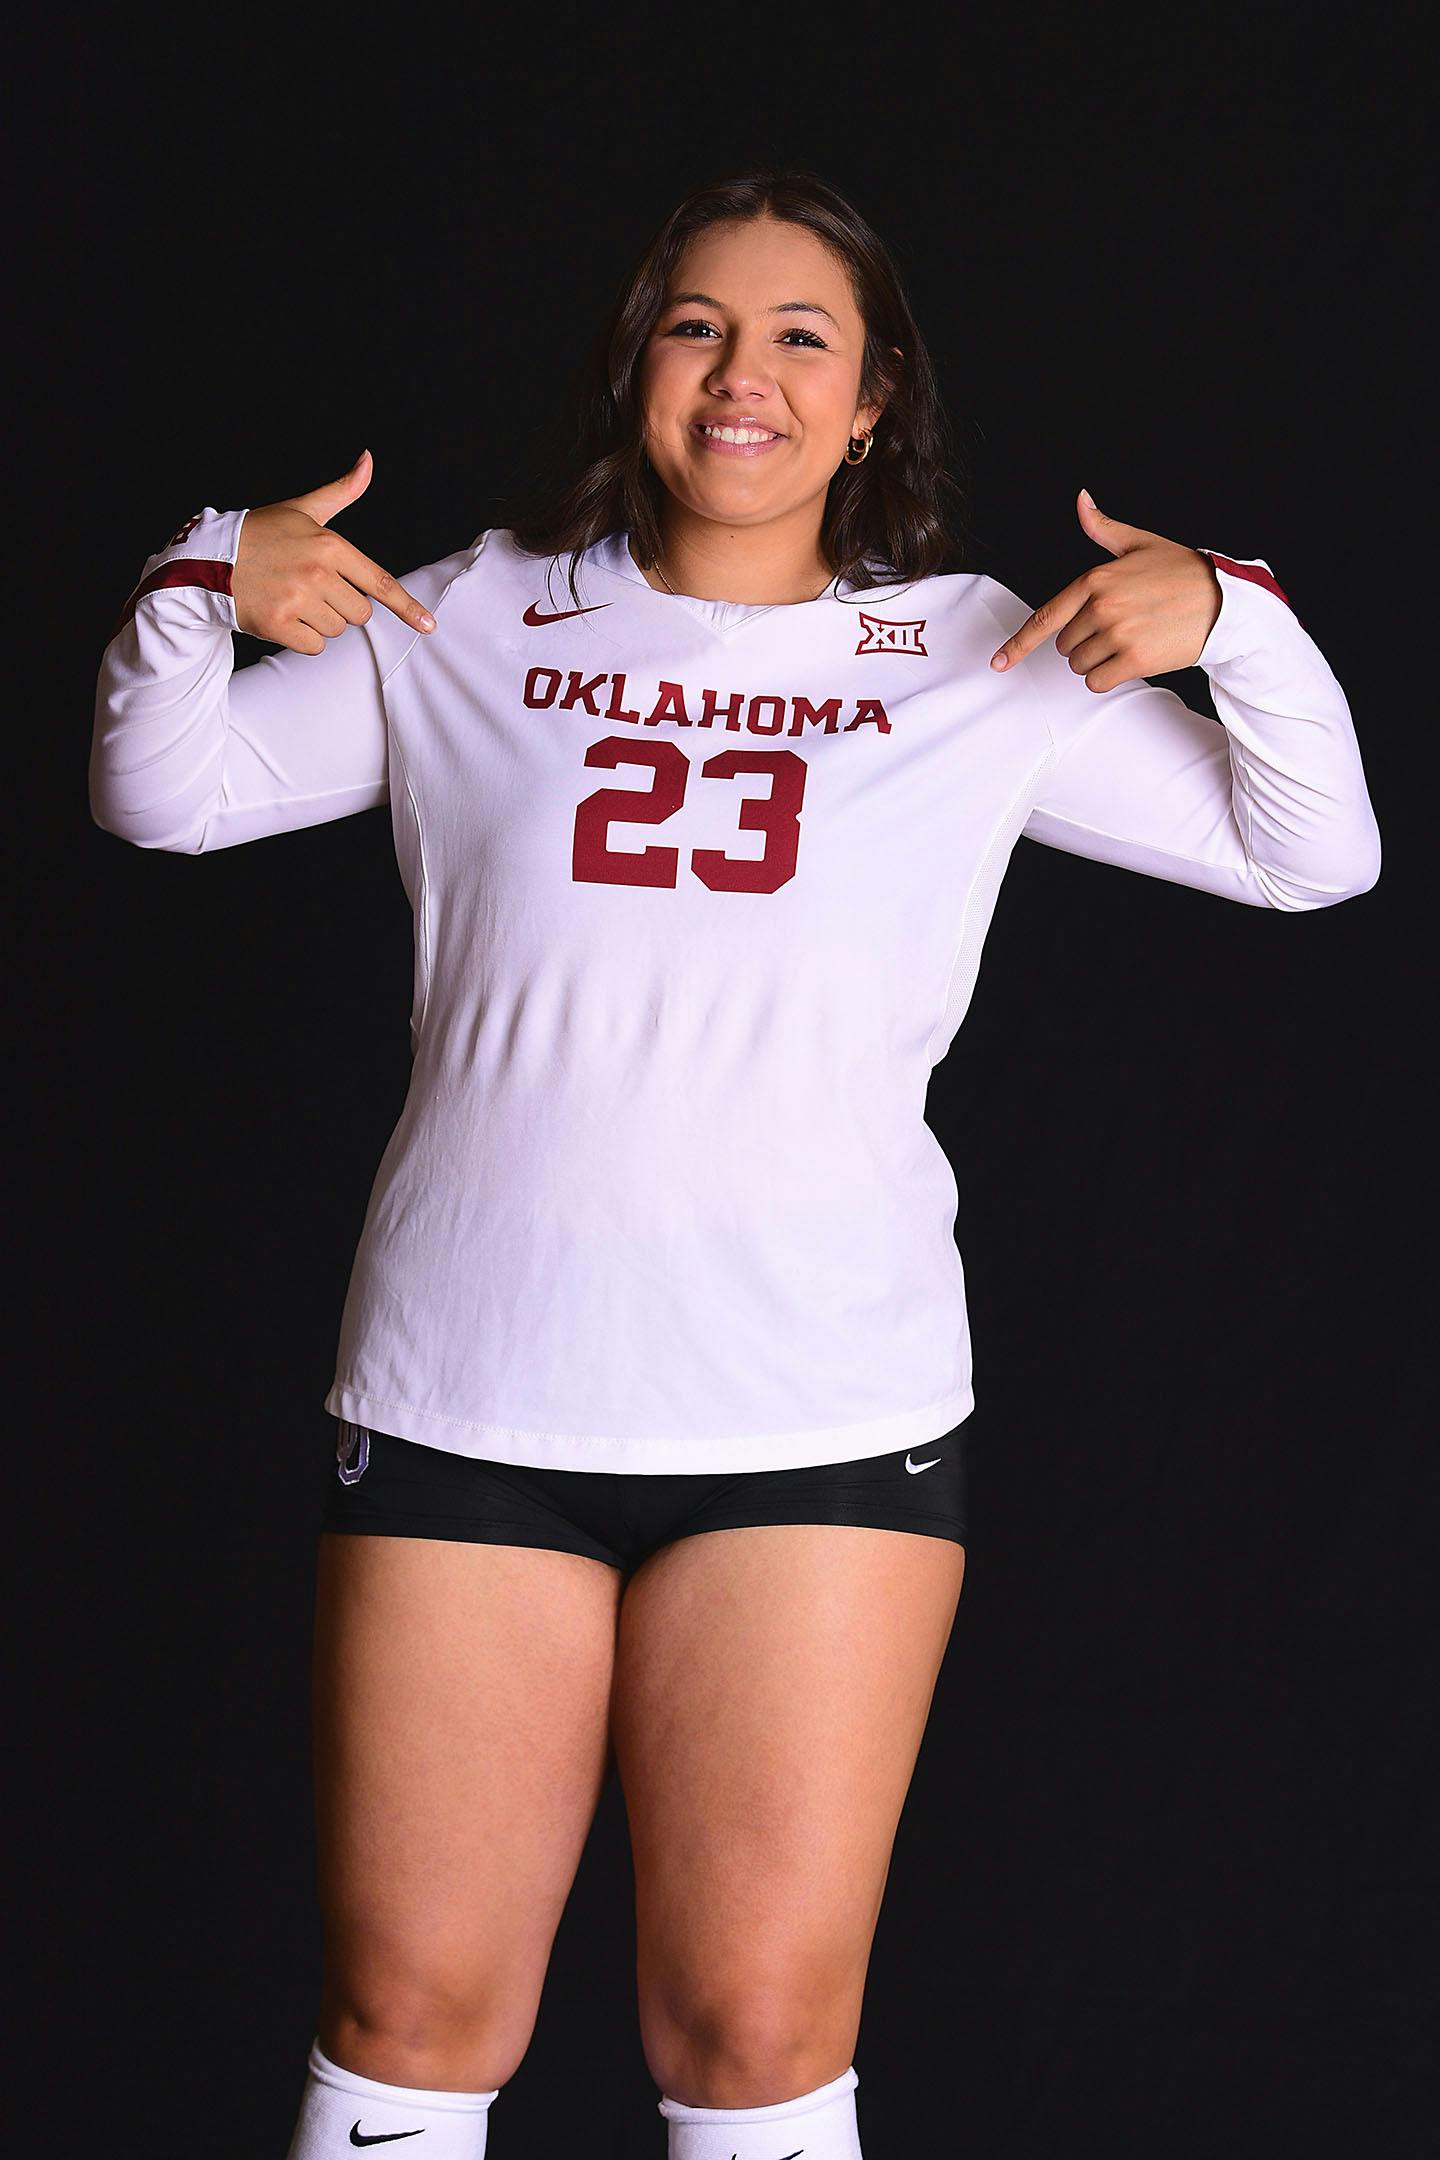 Mele's first picture wearing an OU jersey